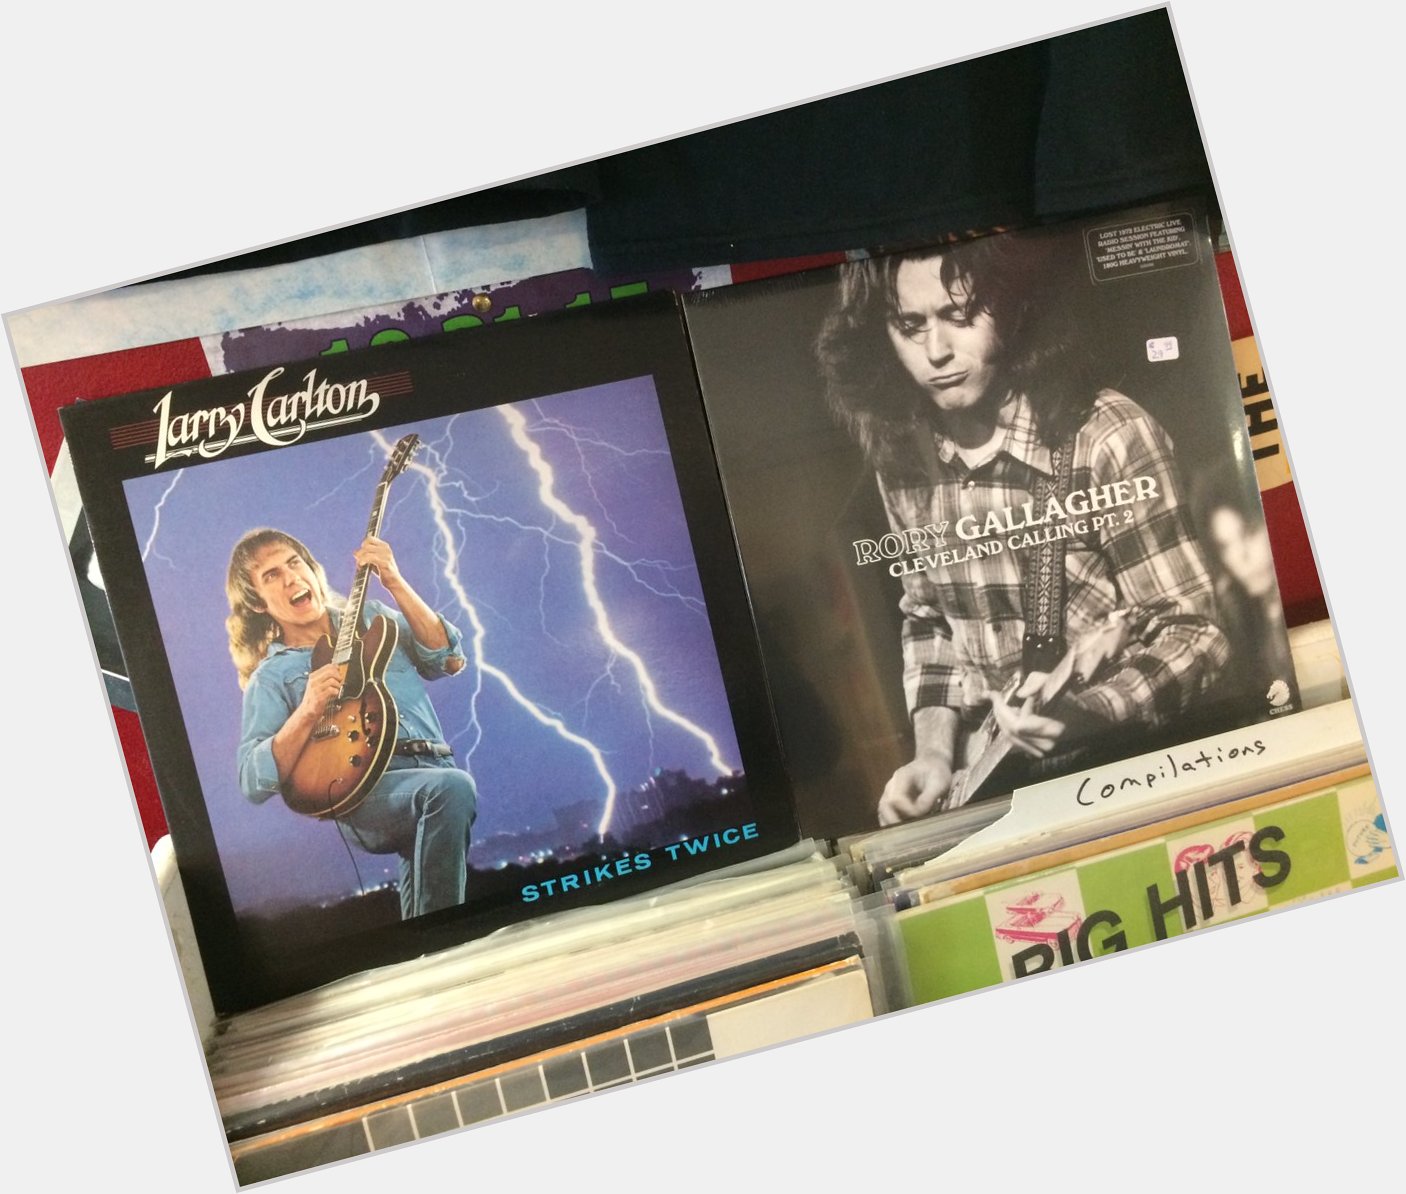 Happy Birthday to Larry Carlton & the late Rory Gallagher 